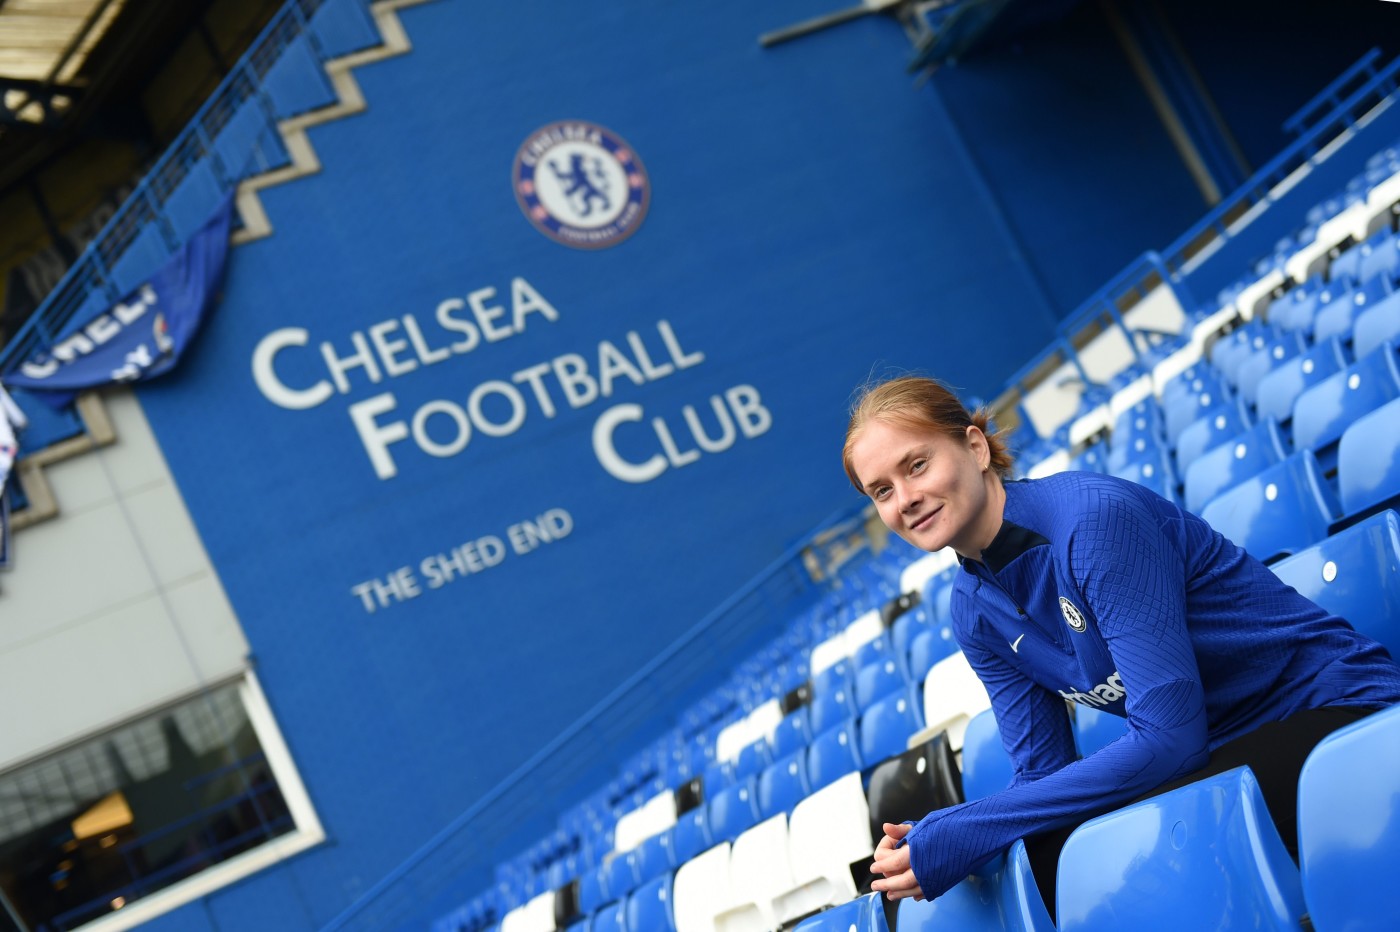 Our new German midfielder will join compatriots Ann-Katrin Berger and Melanie Leupolz at Chelsea in July